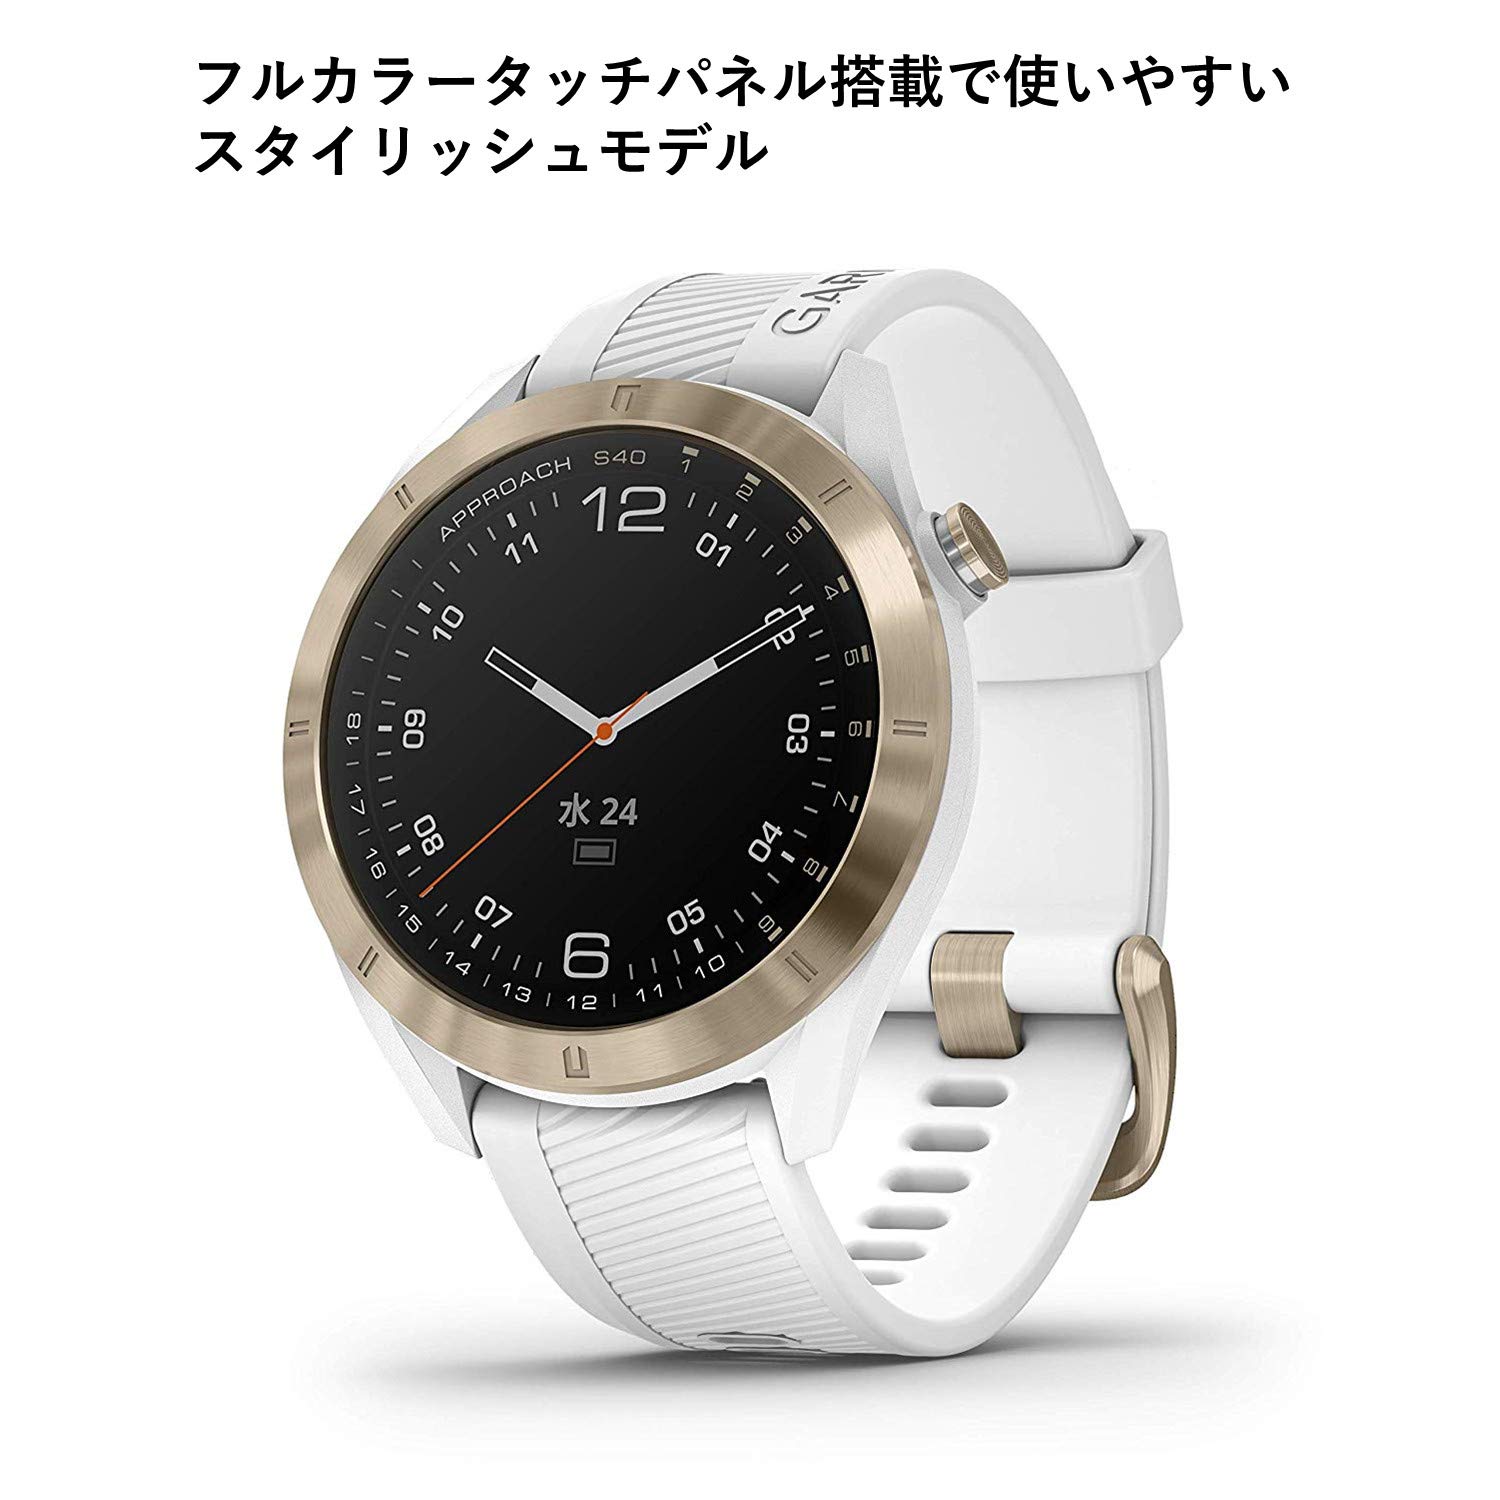 Garmin Approach S40 GPS Golf Watch (Authentic Japanese Product, English Language Not Guaranteed)